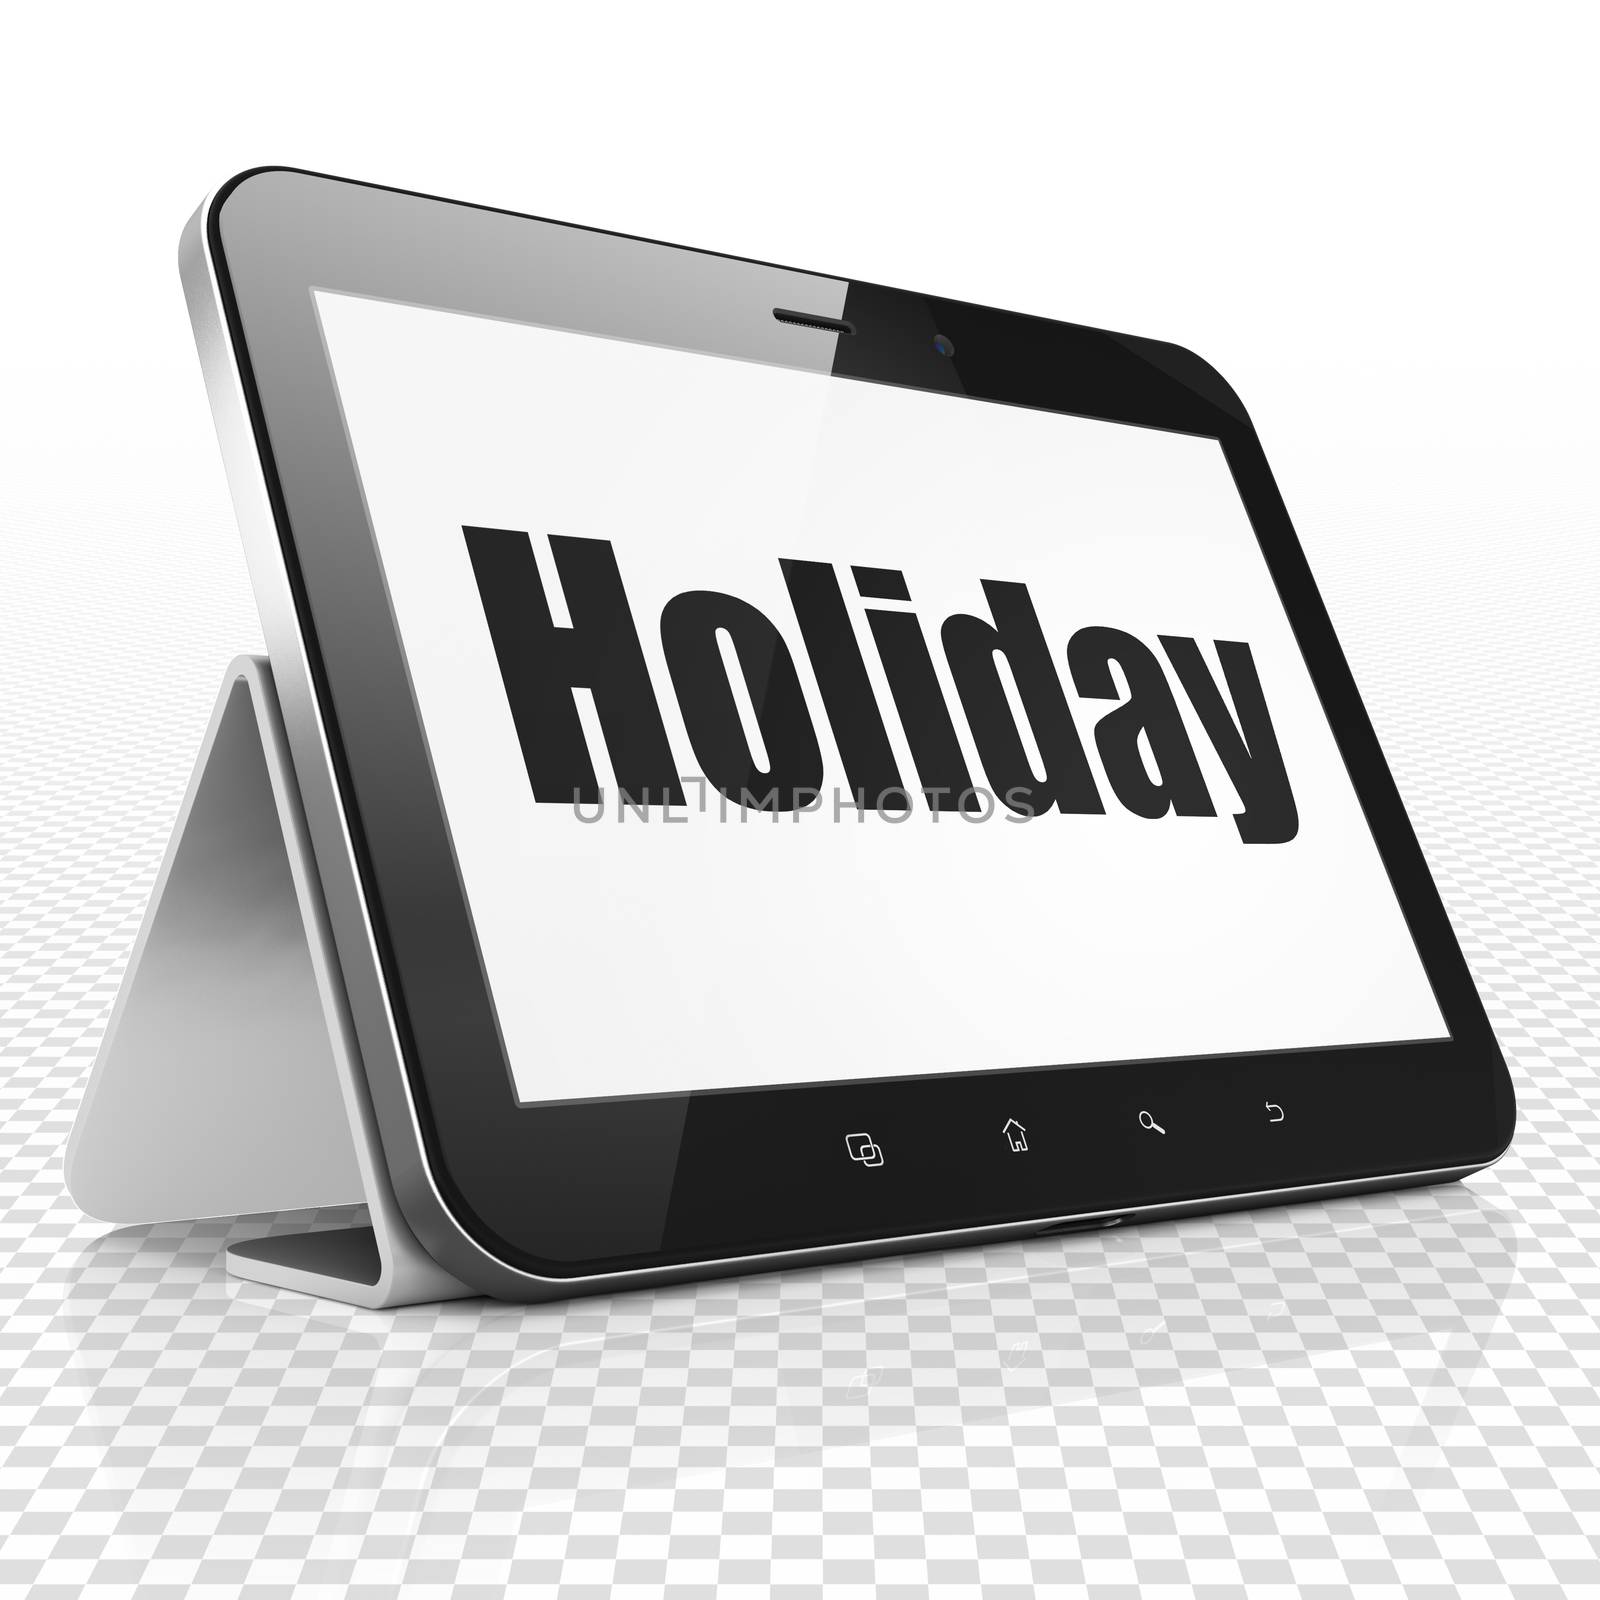 Travel concept: Tablet Computer with Holiday on display by maxkabakov